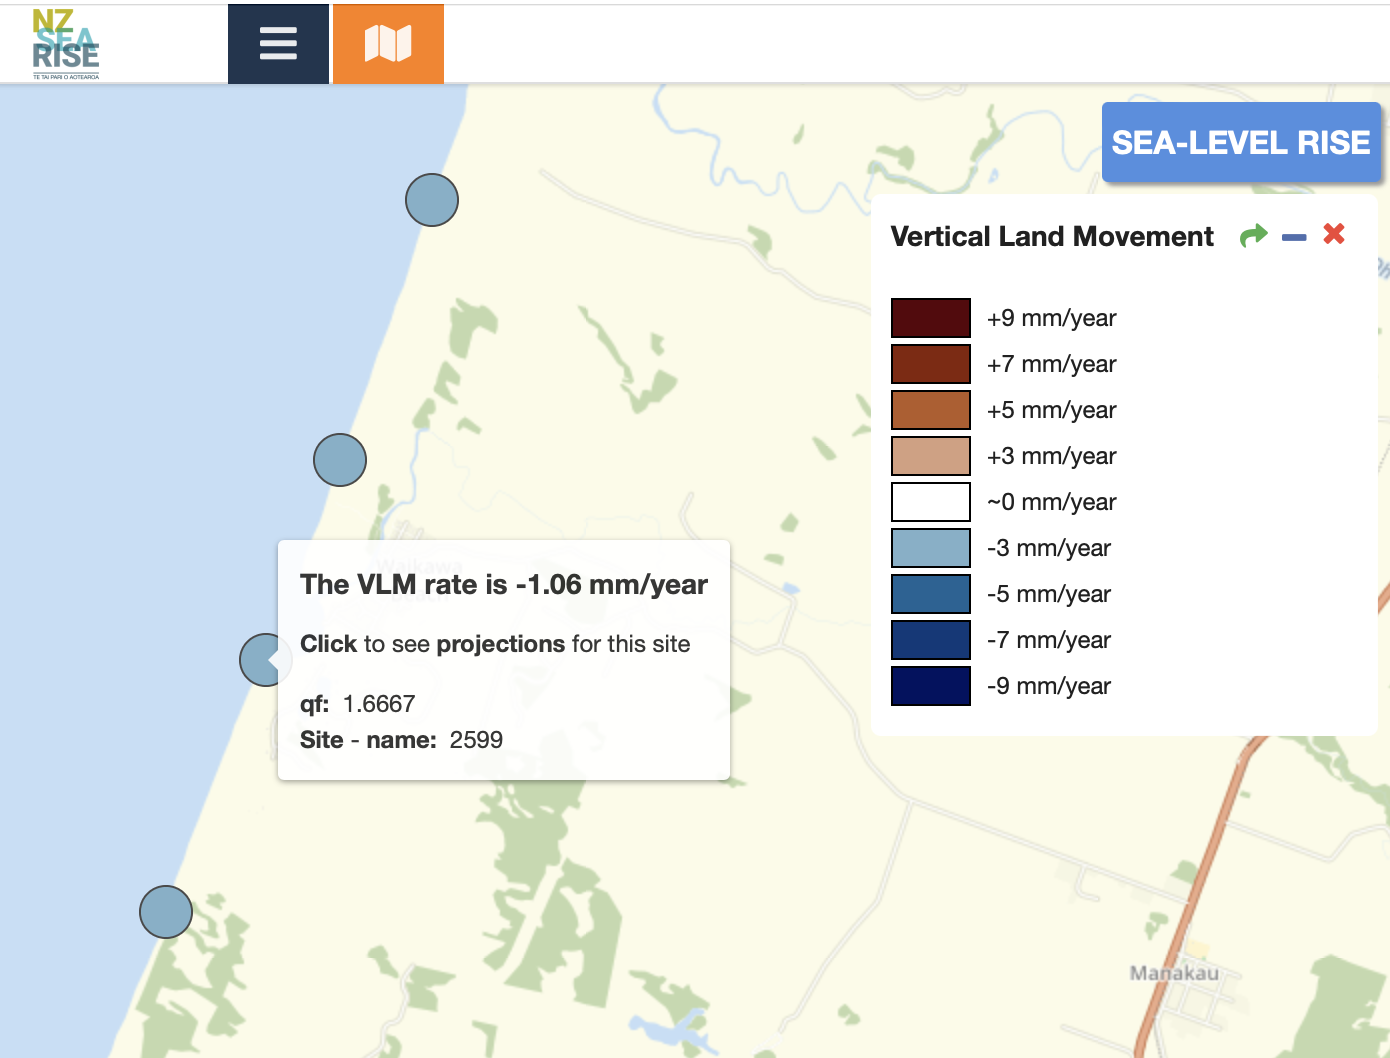 Map location near Reay Mackay Grove shows: The VLM rate is 1.06 mm/year. 